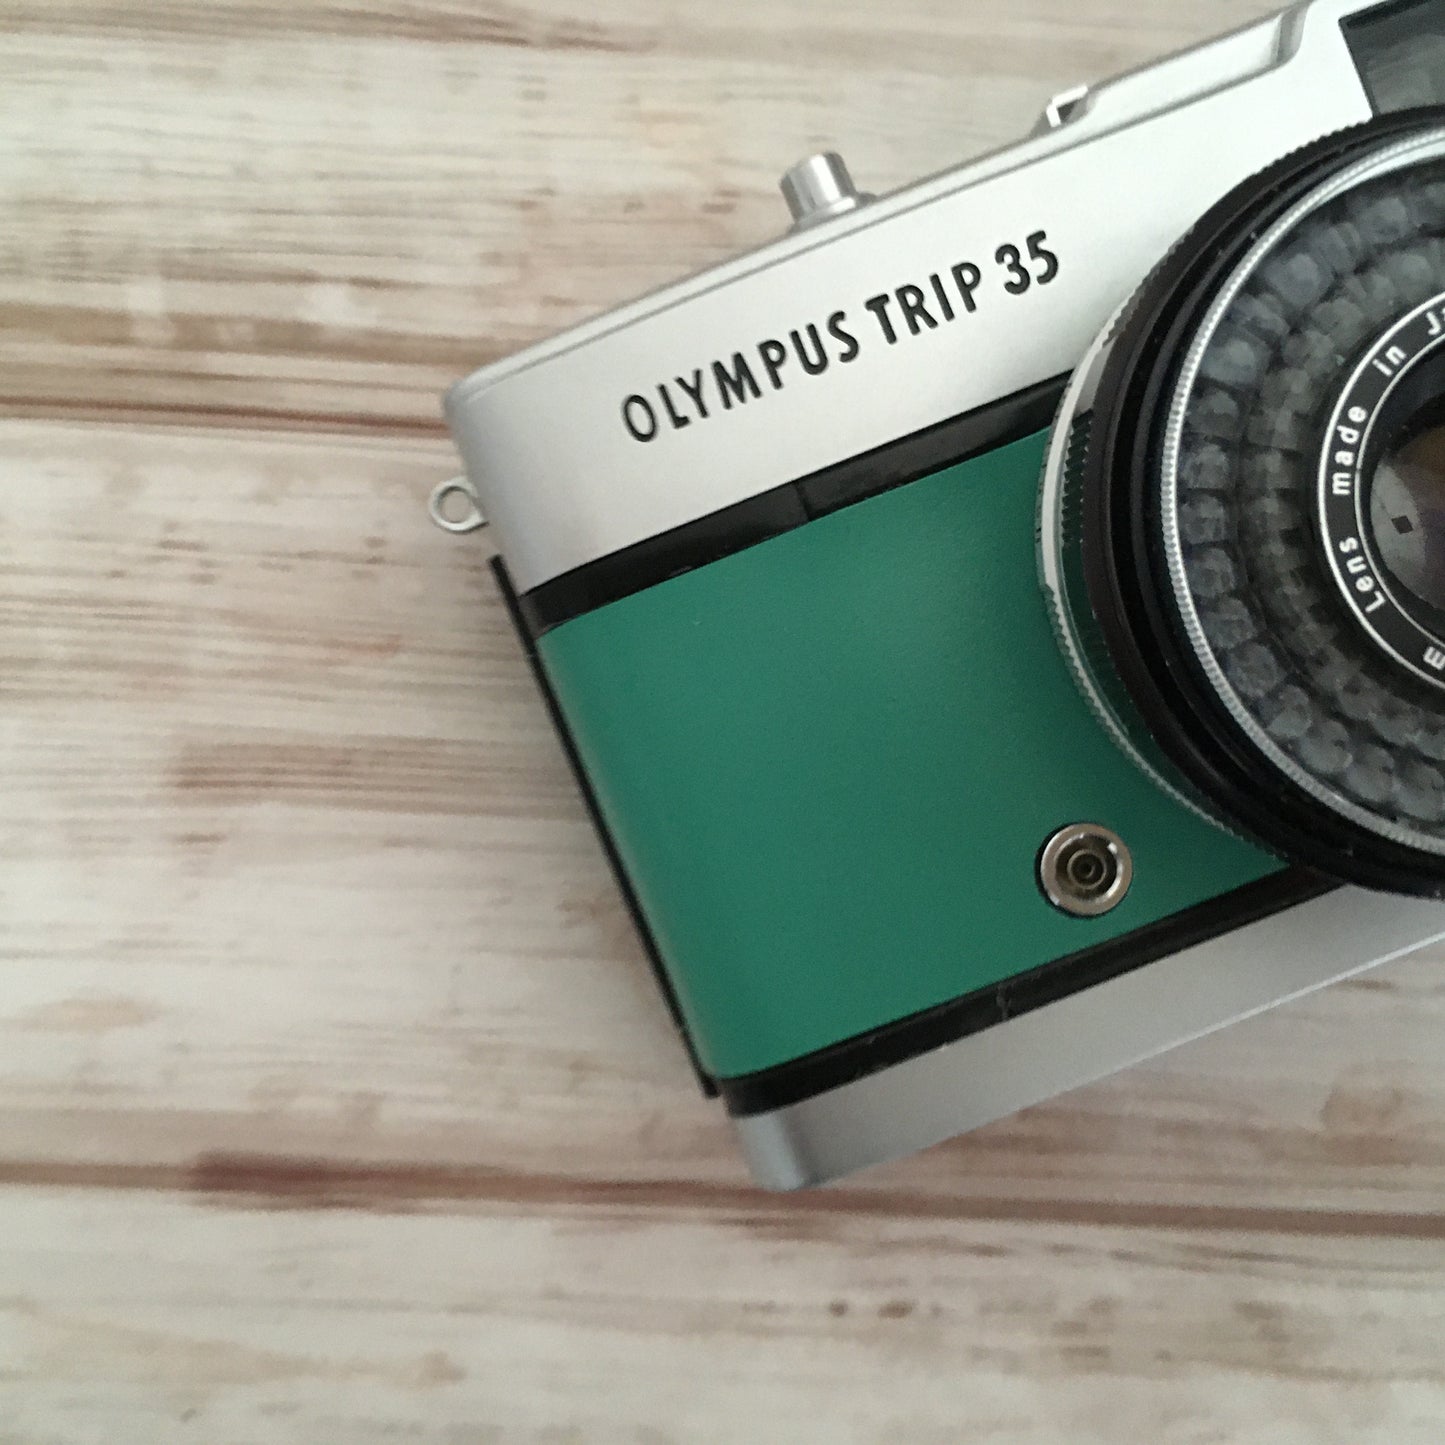 Olympus TRIP35 with jade green smooth leather